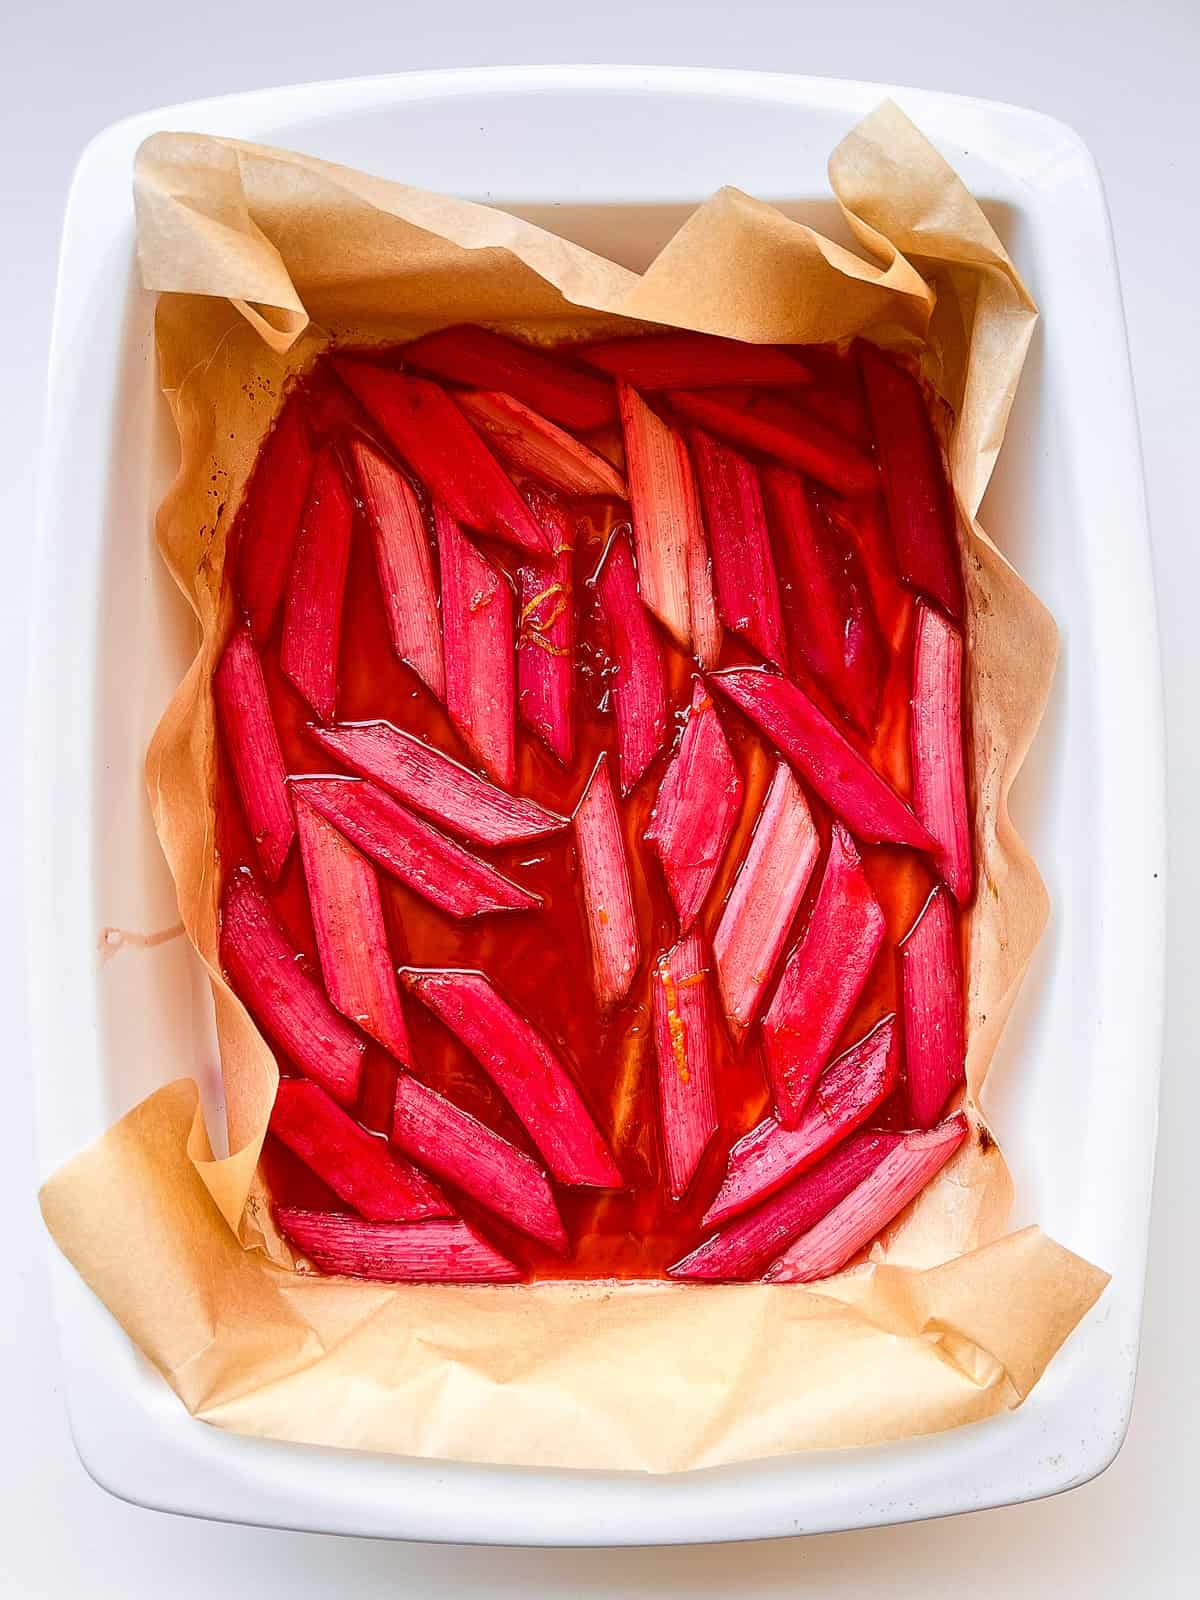 An image of cut rhubarb in a roasting tray after roasting.